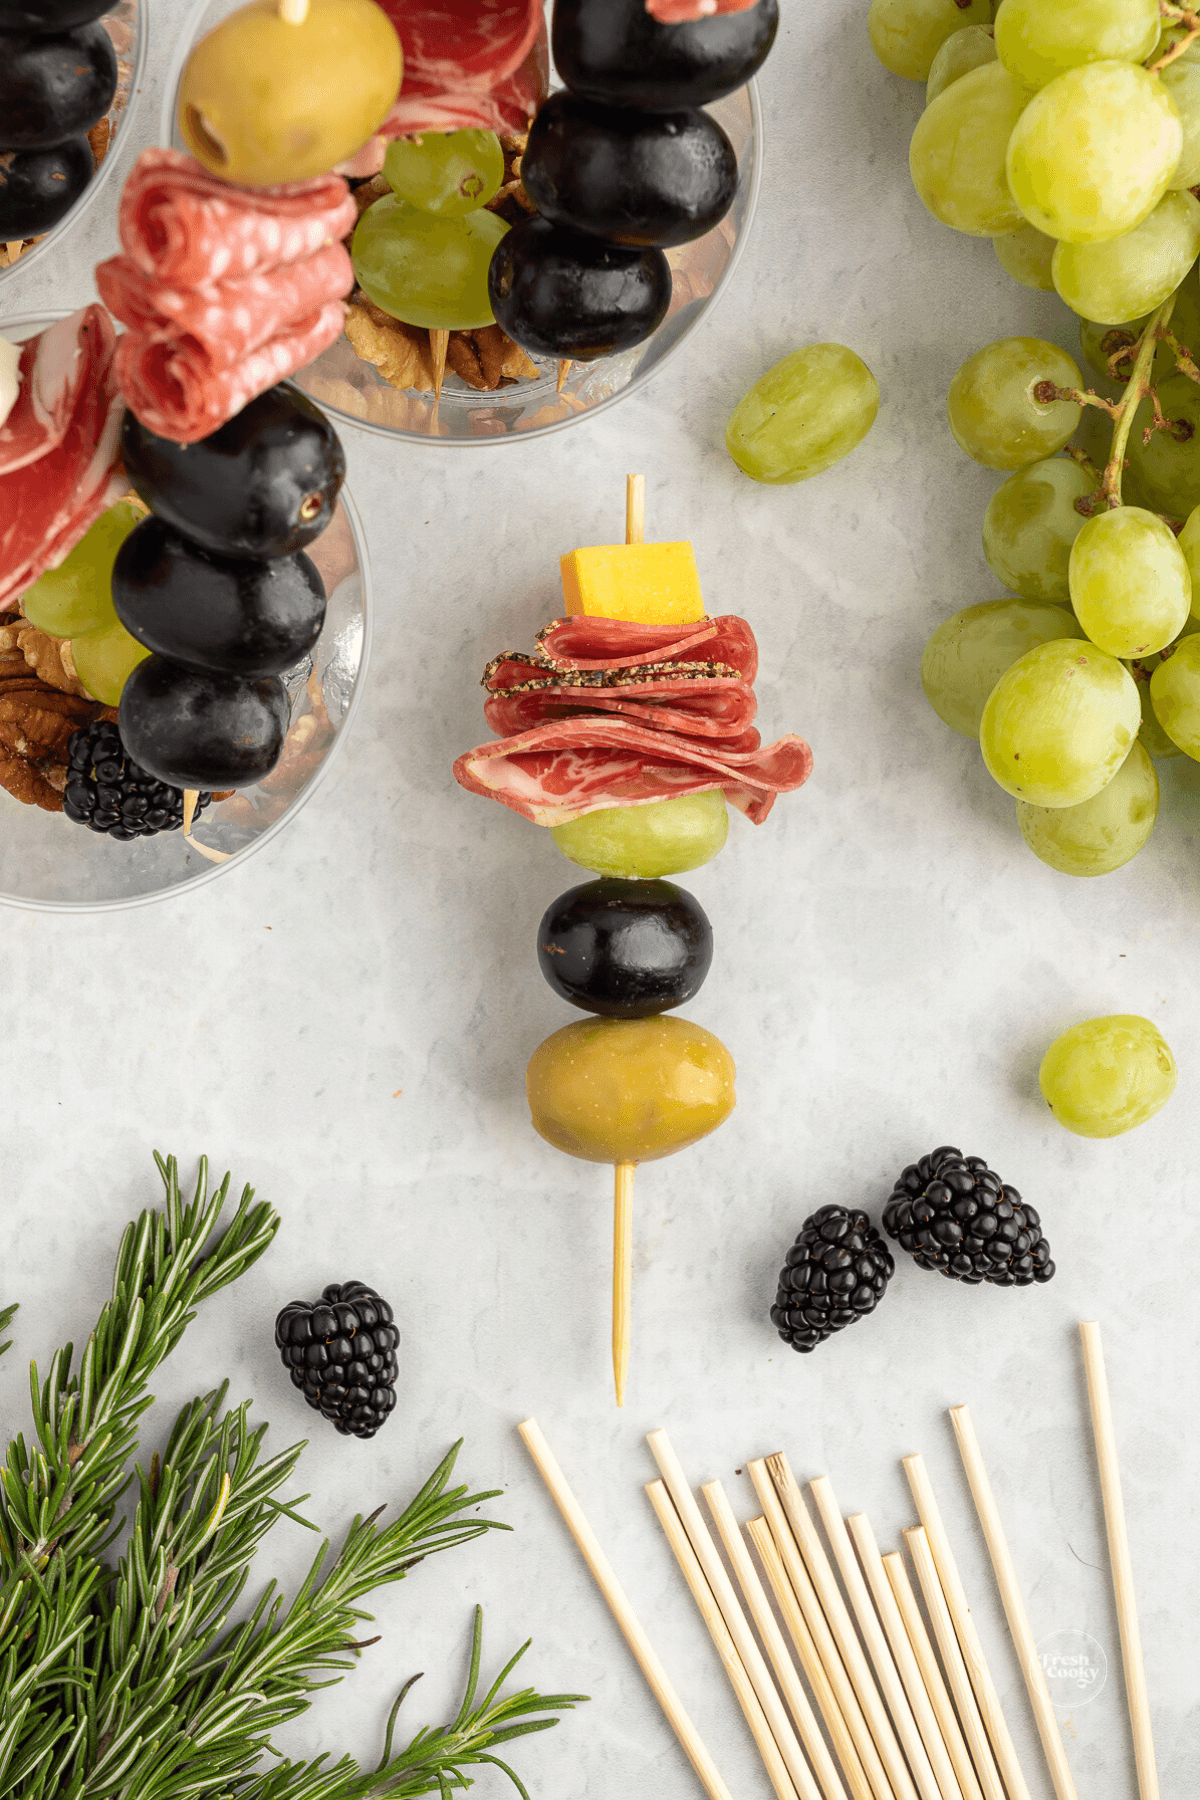 Layering fruit, meat, cheese and olives on skewer.